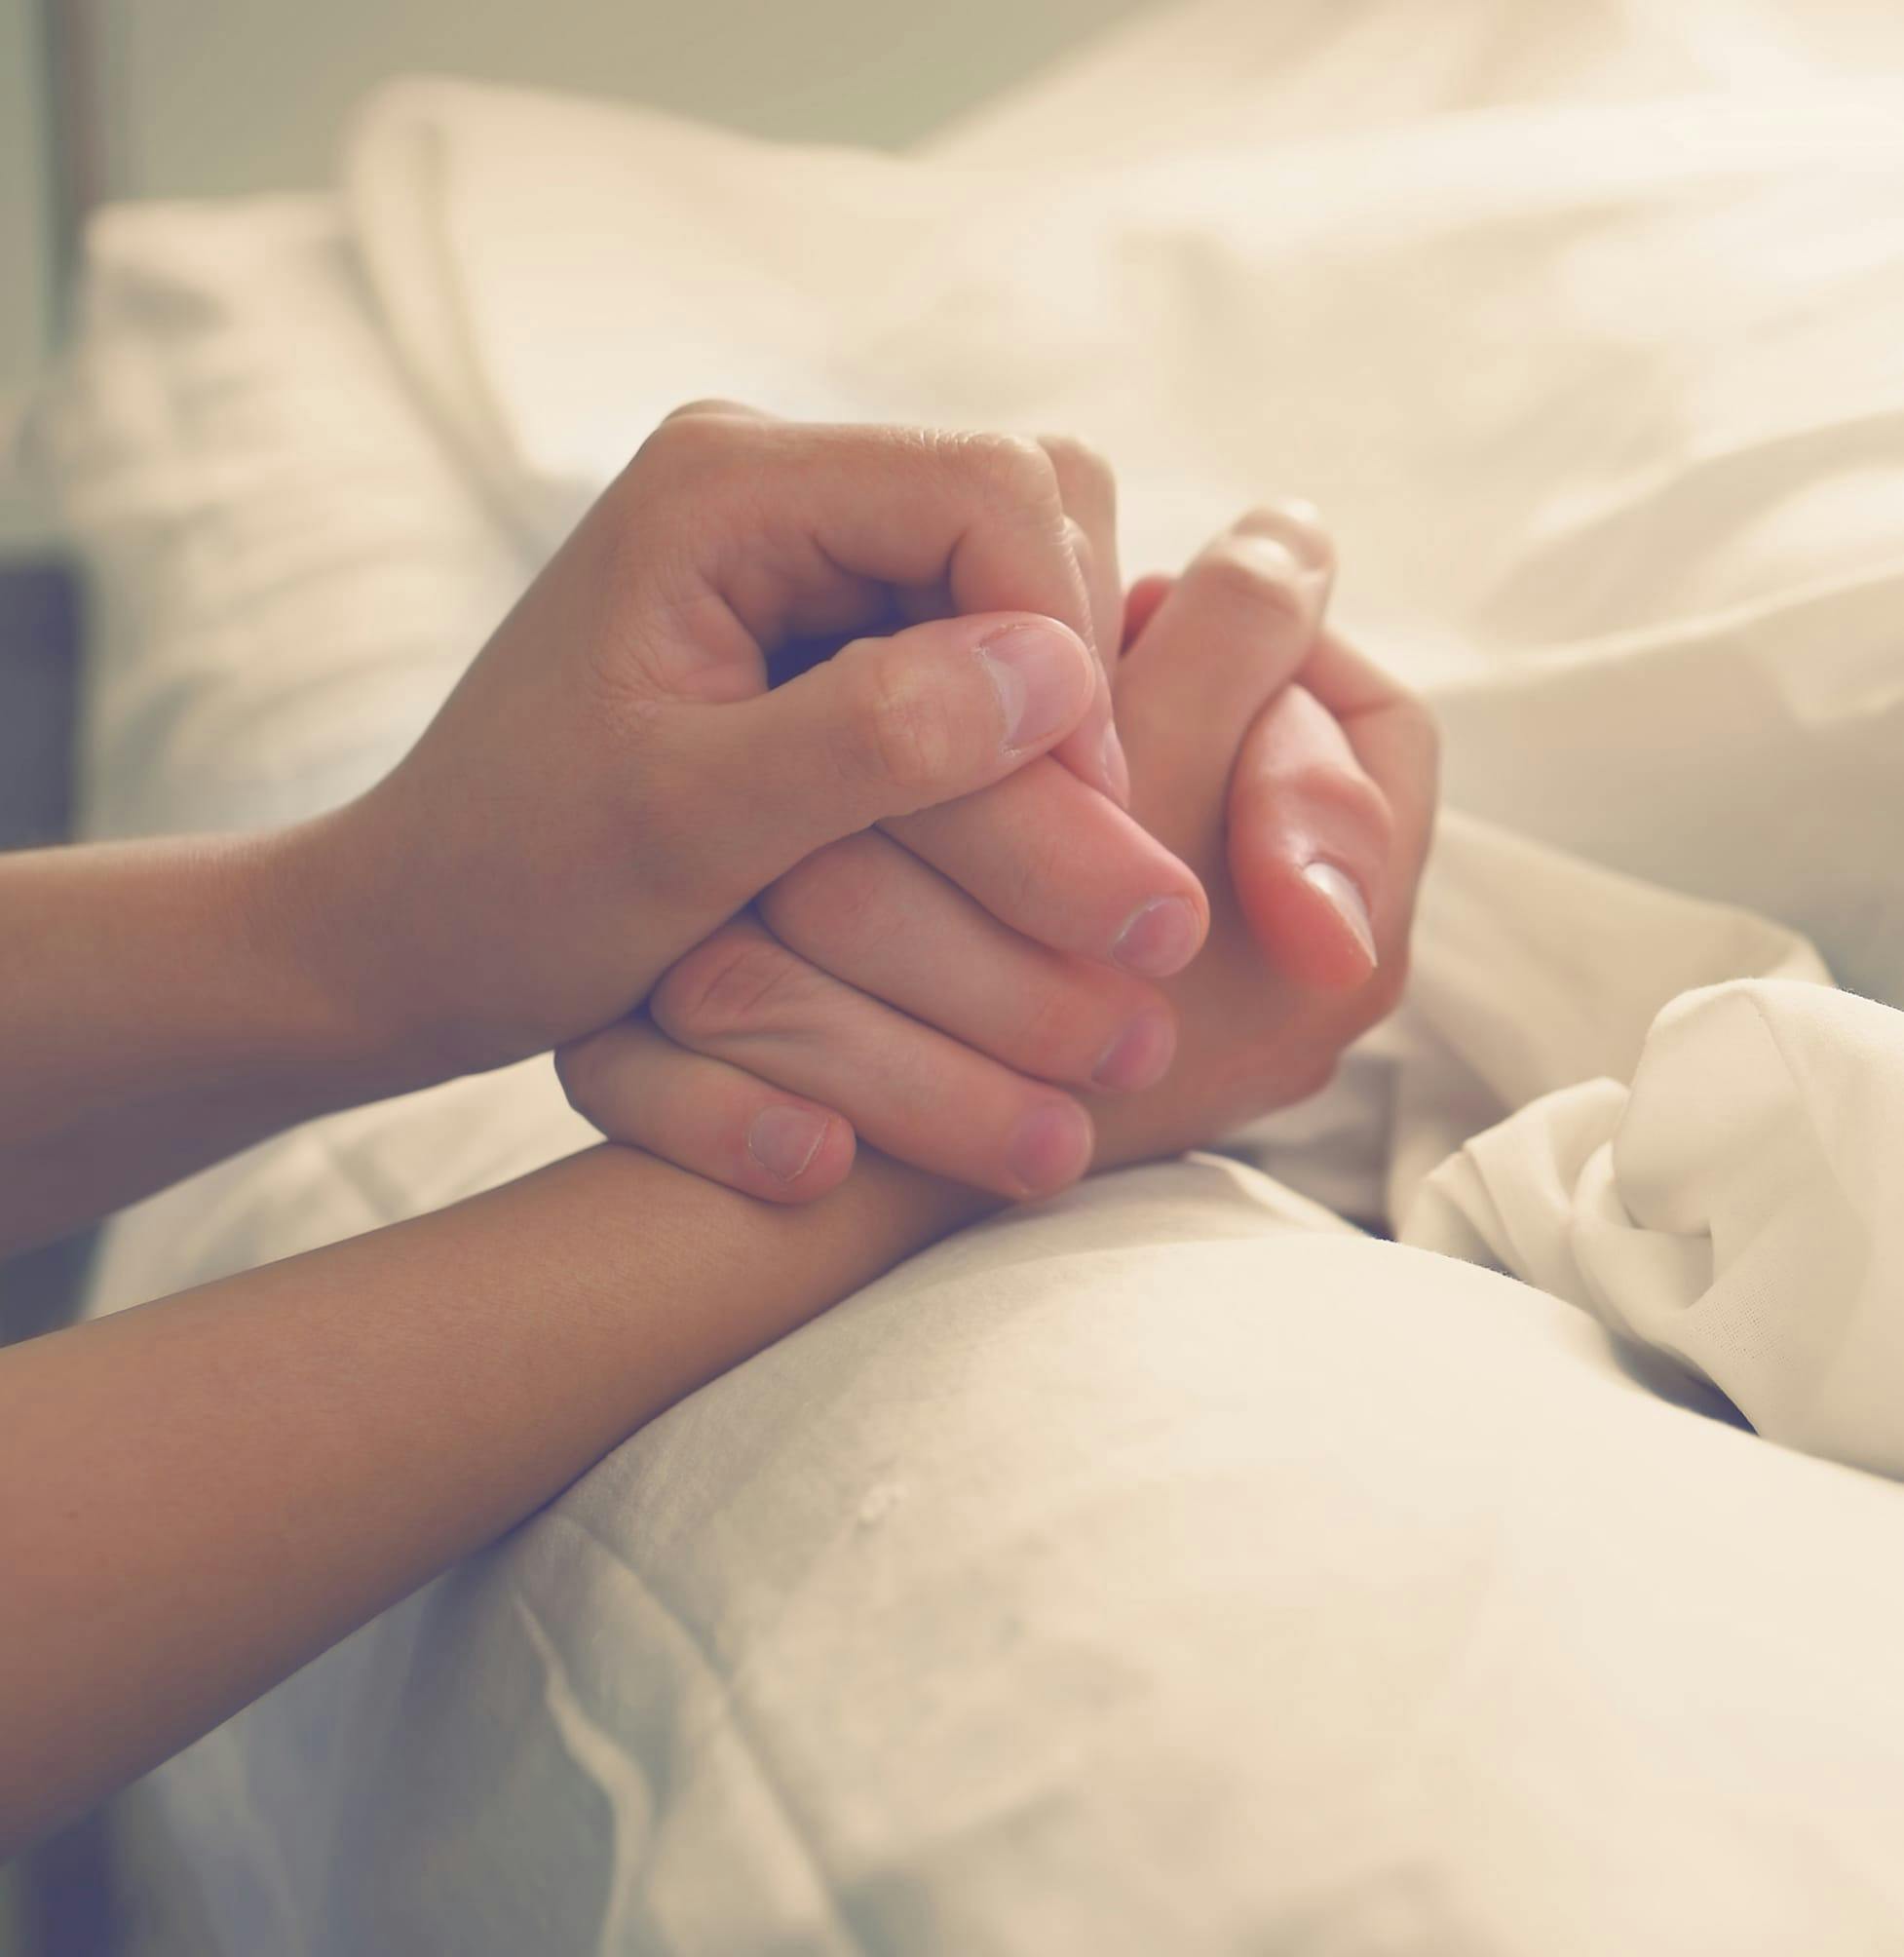 Two people holding hands, one is in a hospital bed.